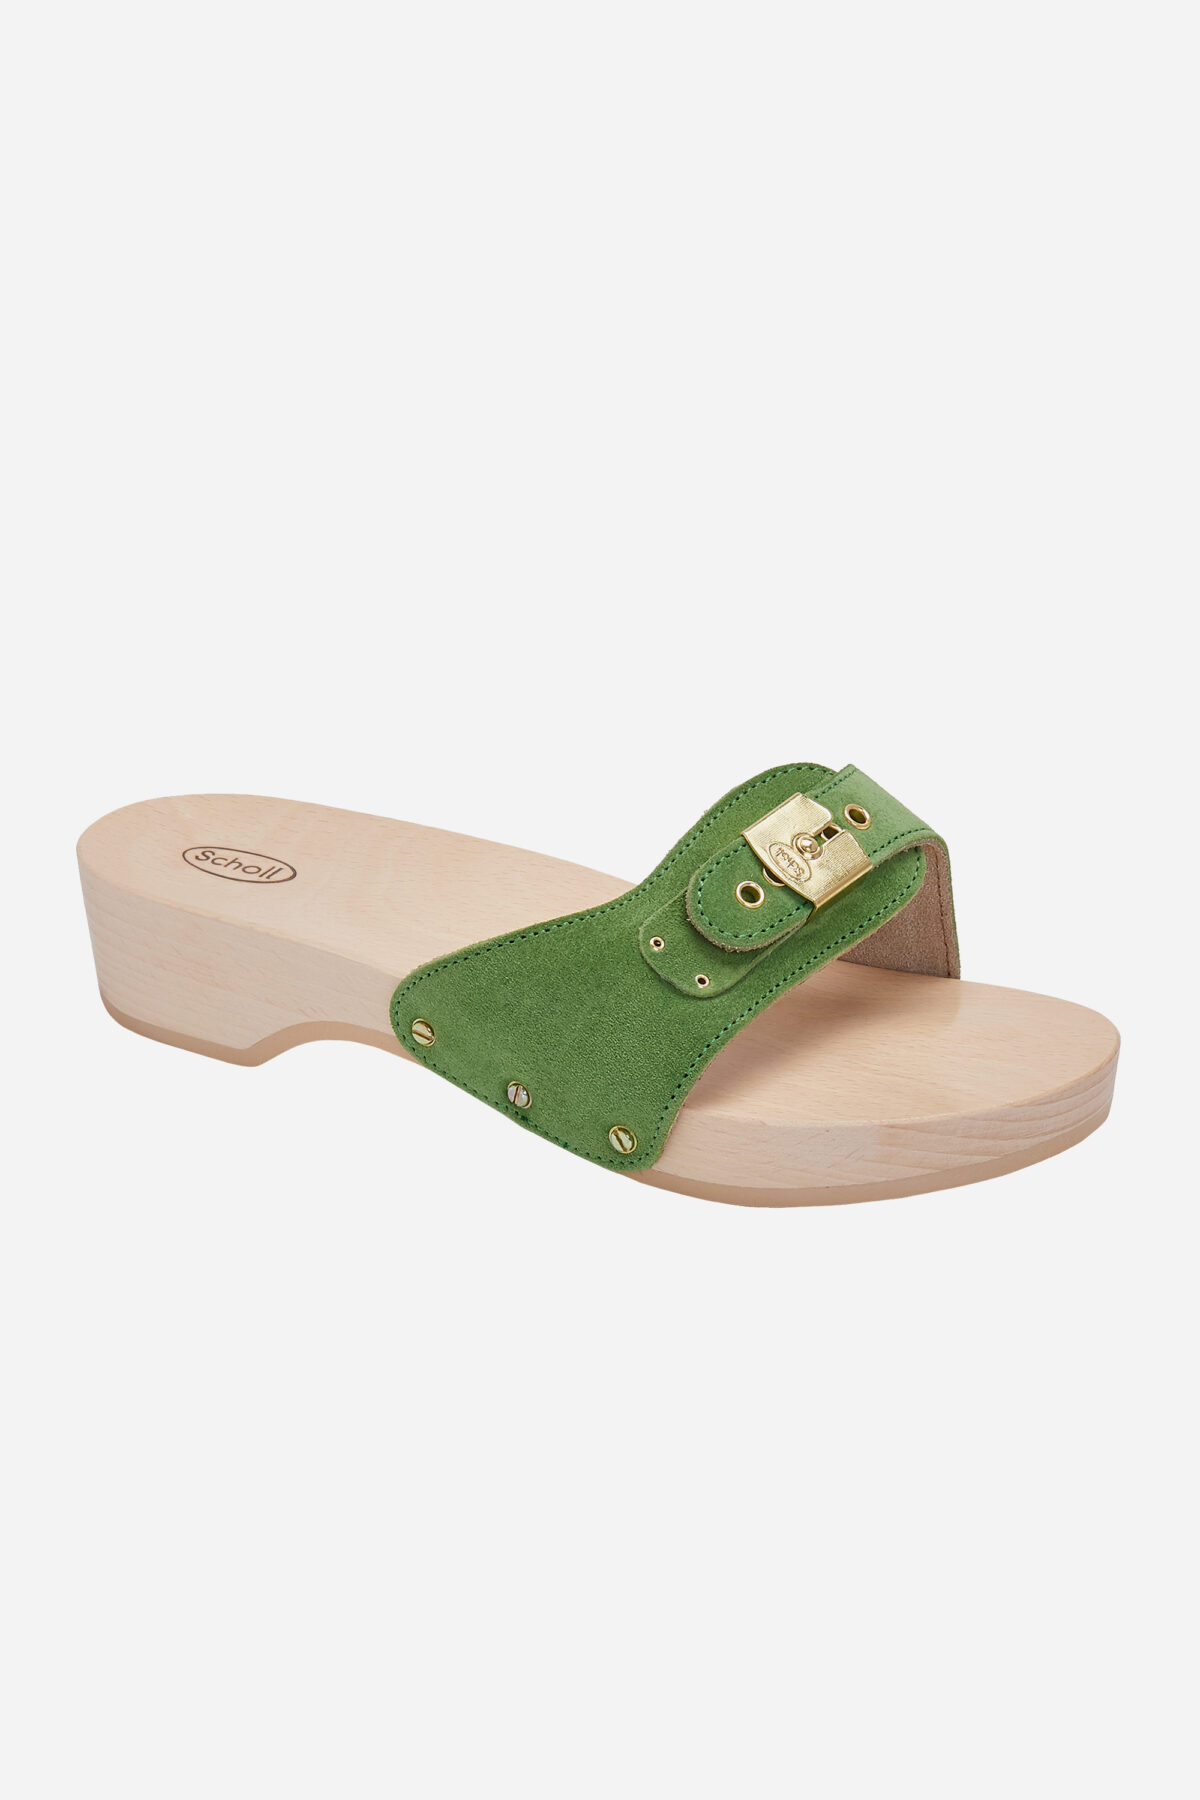 PESCURA-green-suede-leather-SCOLLS-WOODEN-SANDAL-MATCHBOXATHENS